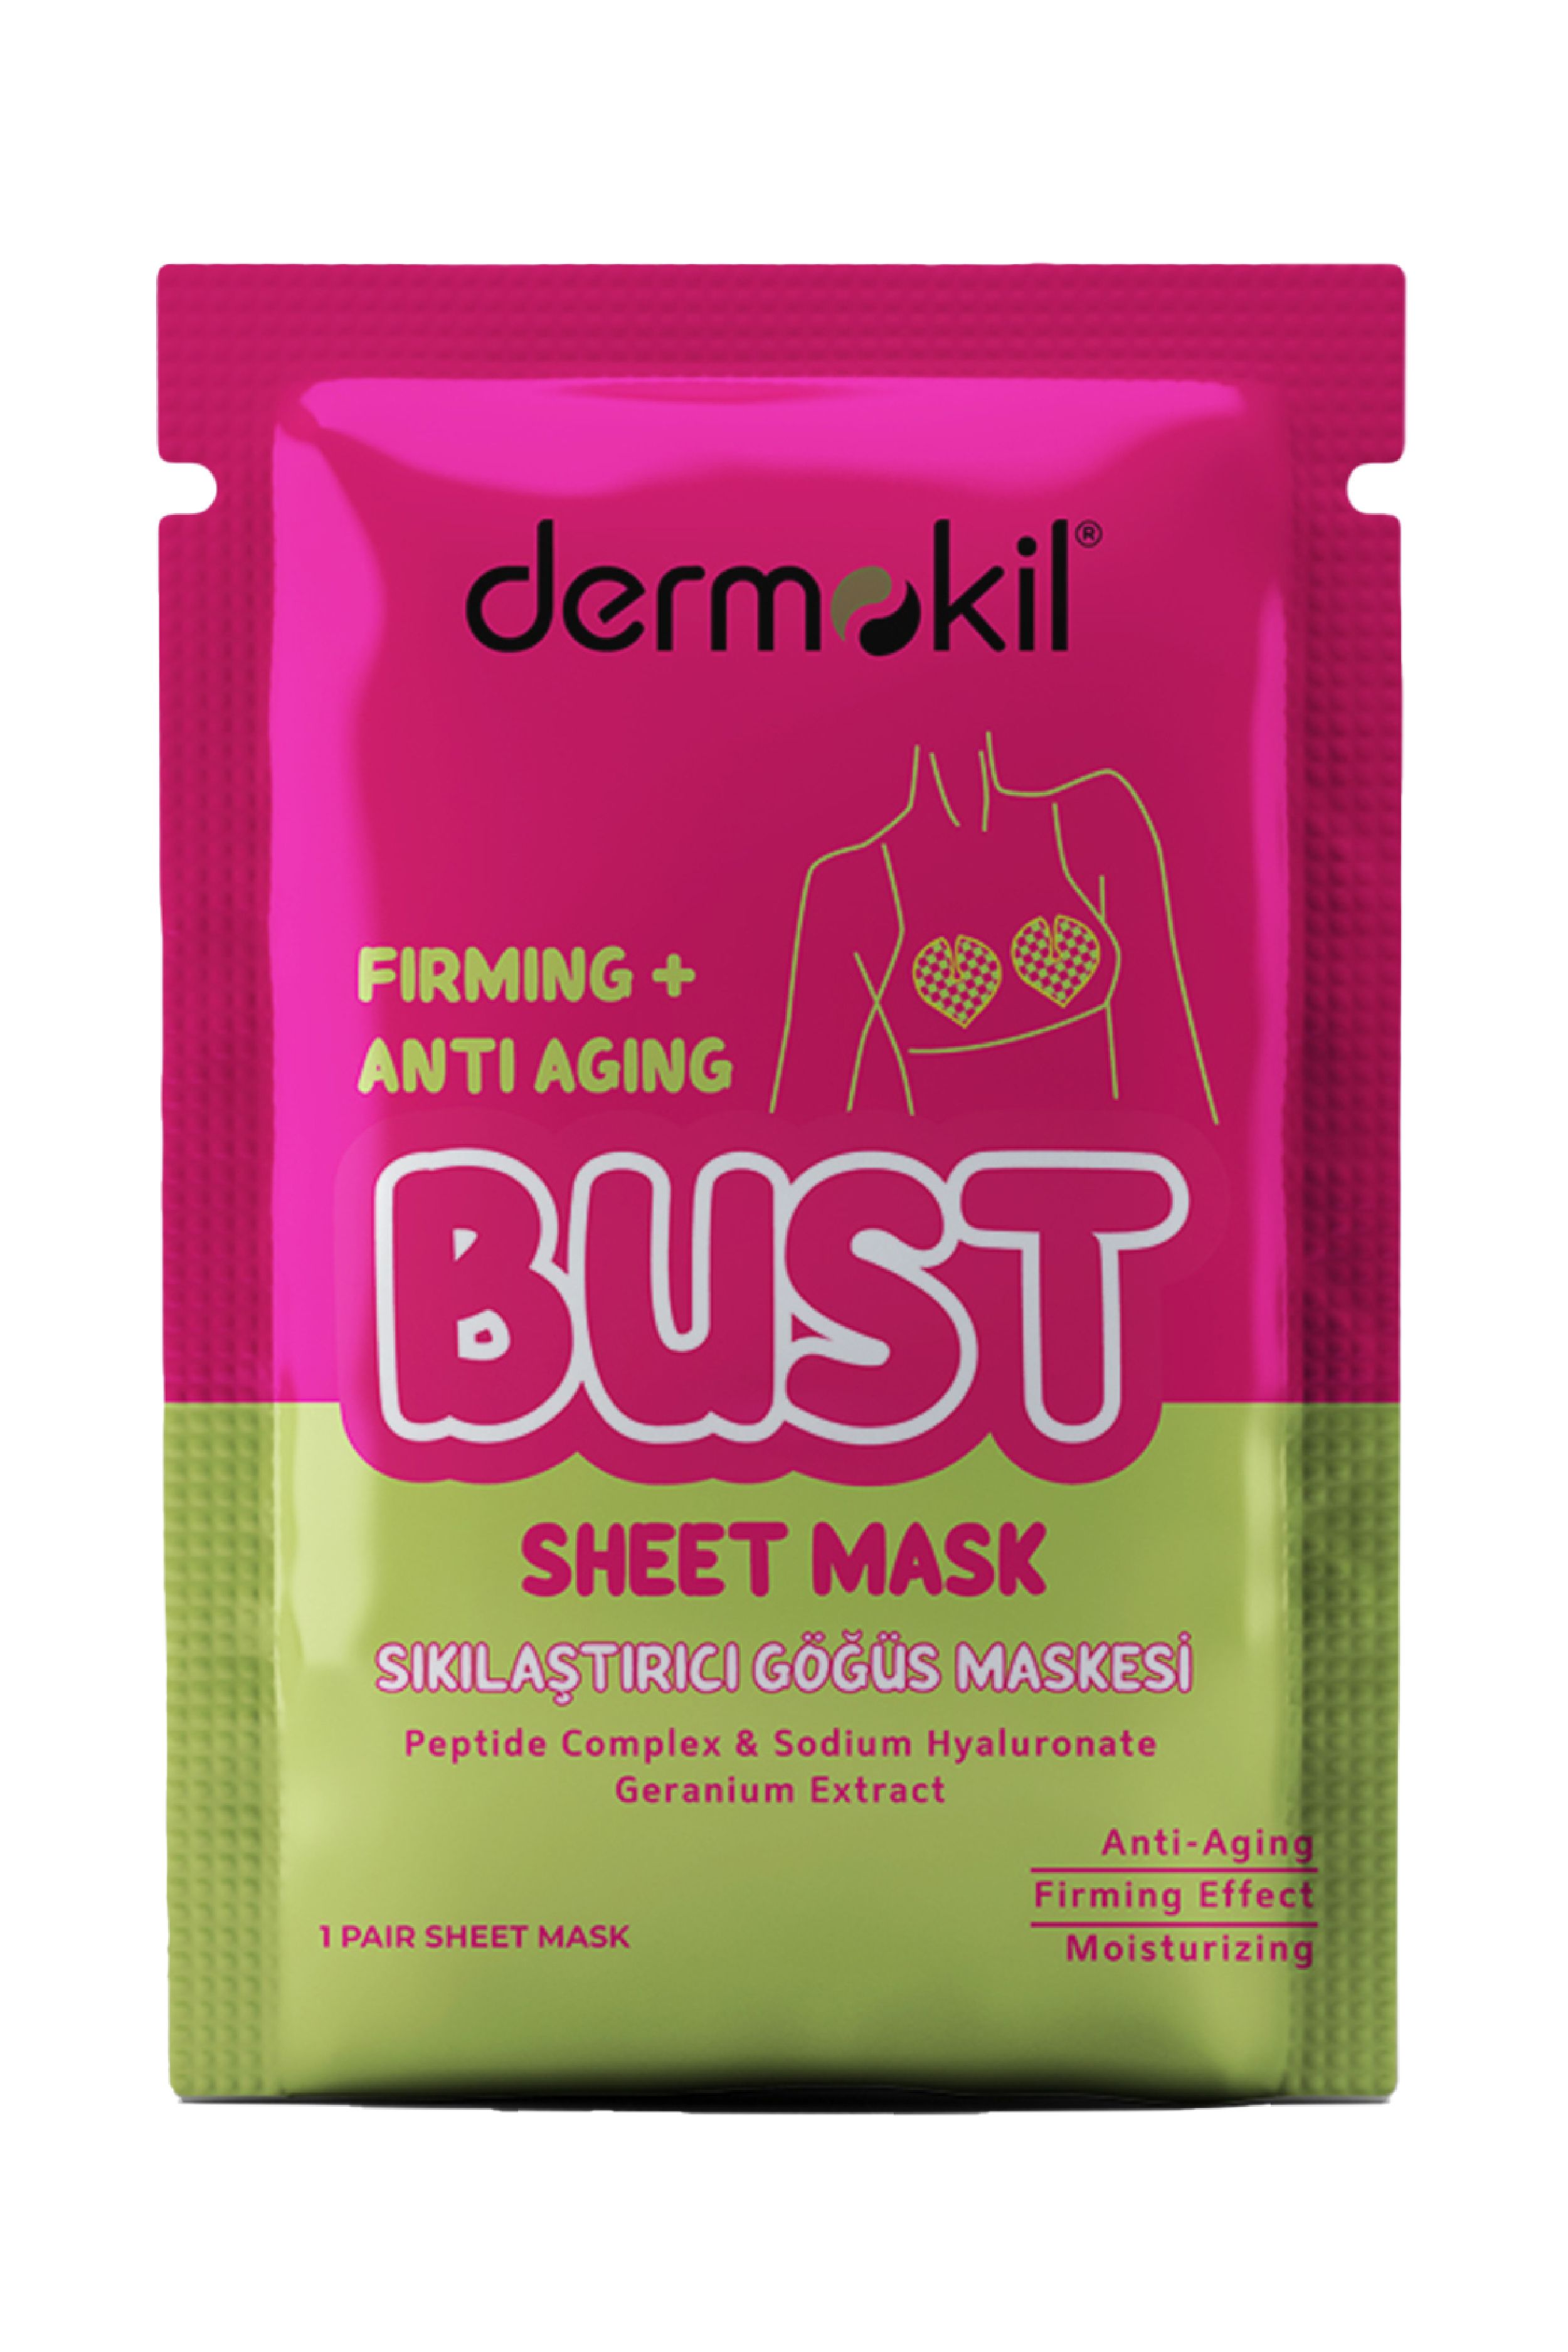 Chest (bust) mask 15 ml